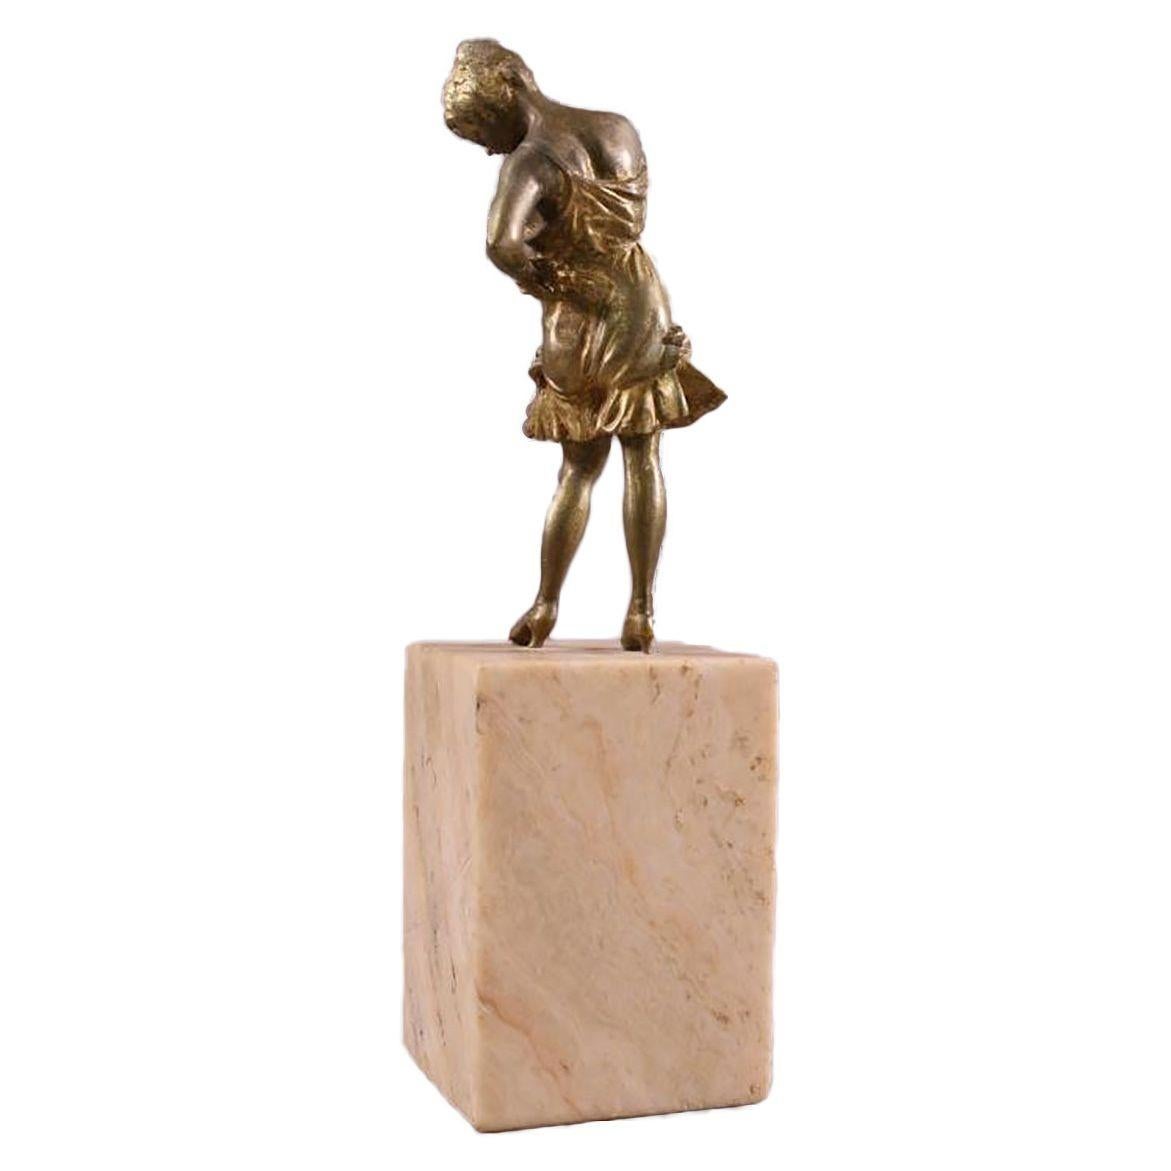 Brass Art Deco Flapper Girl Sculpture on Peach Marble obelisk In Excellent Condition For Sale In Van Nuys, CA